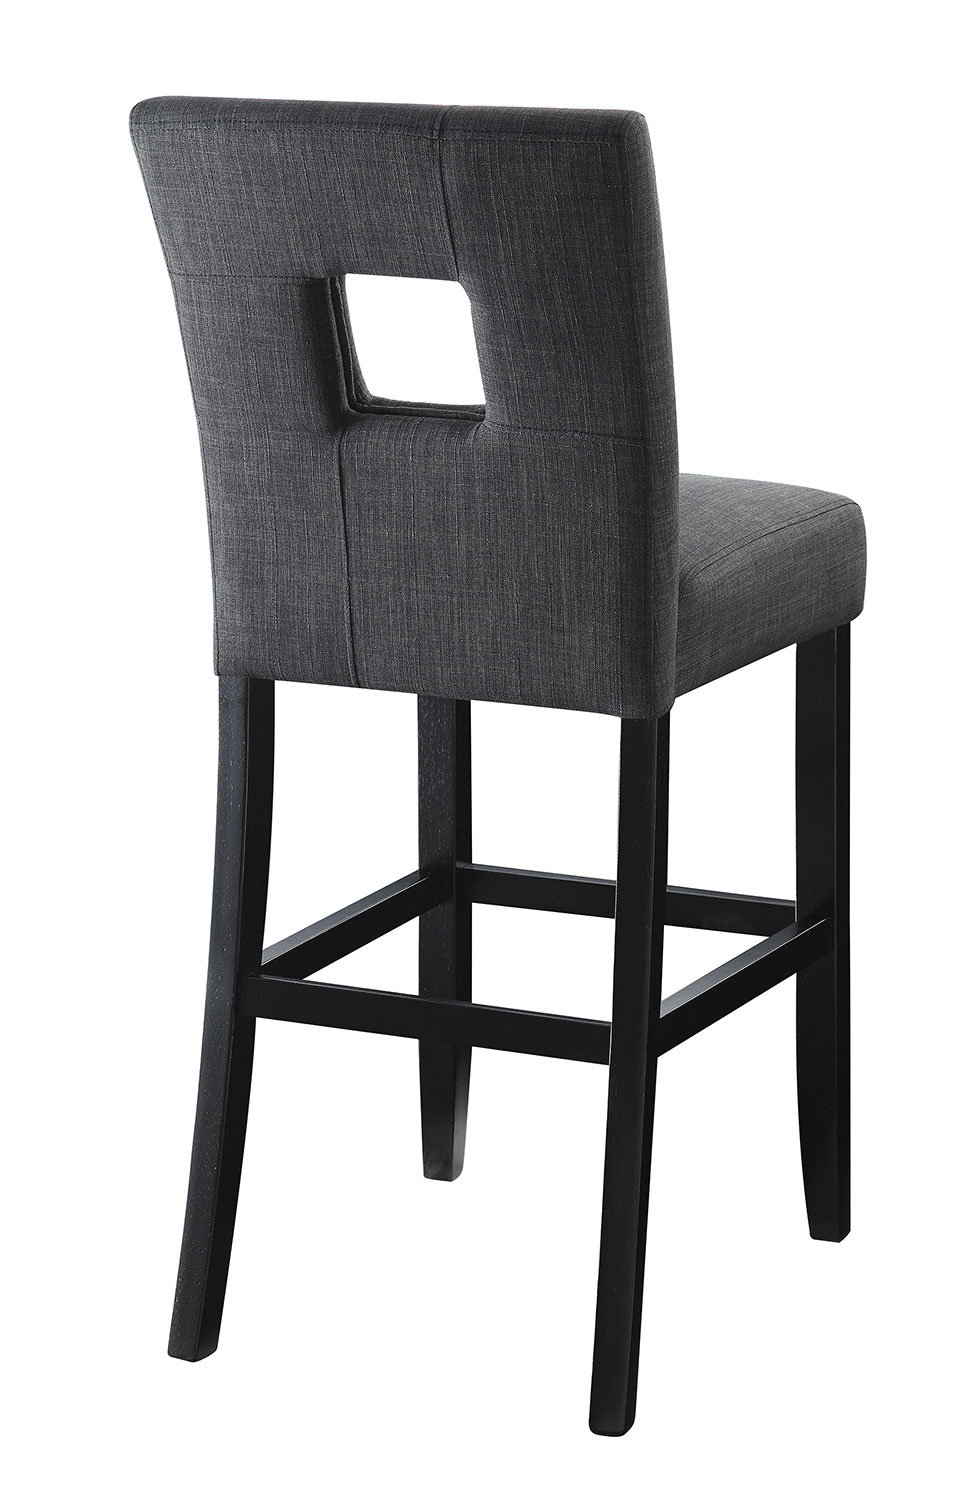 Coaster Andenne Counter Height Chair - Grey/Black